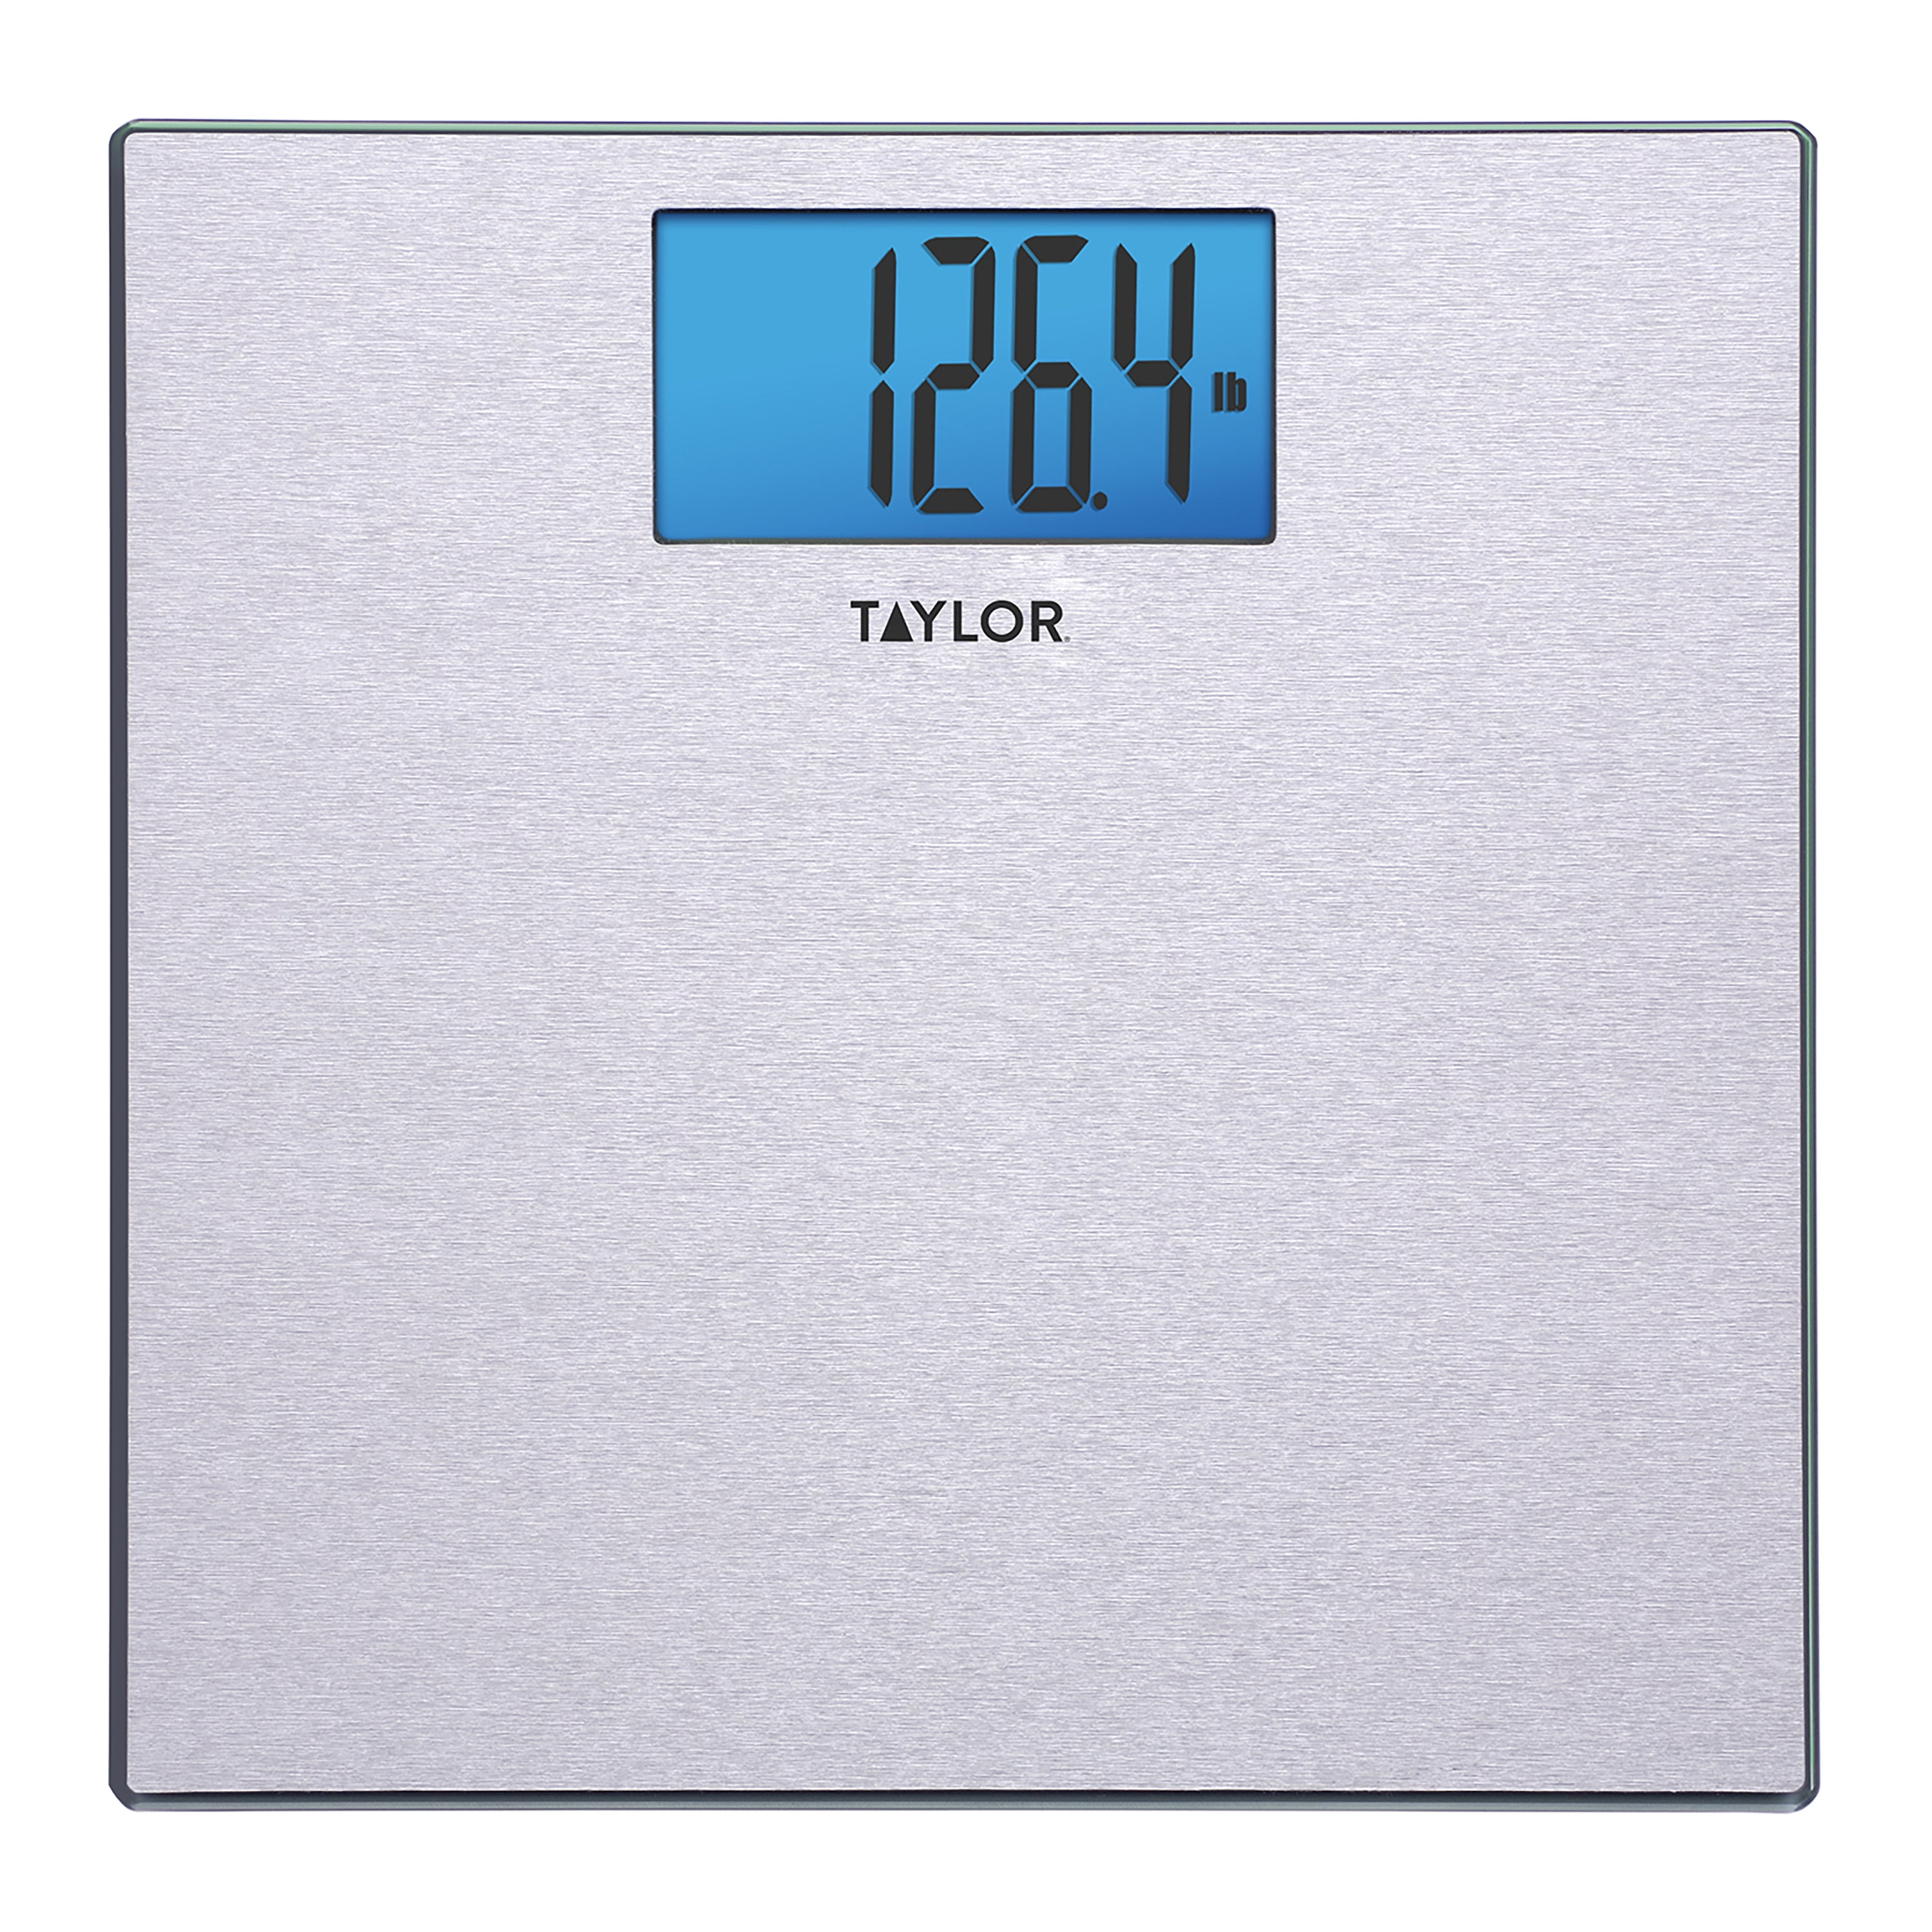 Best NEW Digital Body Weight Bathroom Scale With Free Gift Tape Measure 